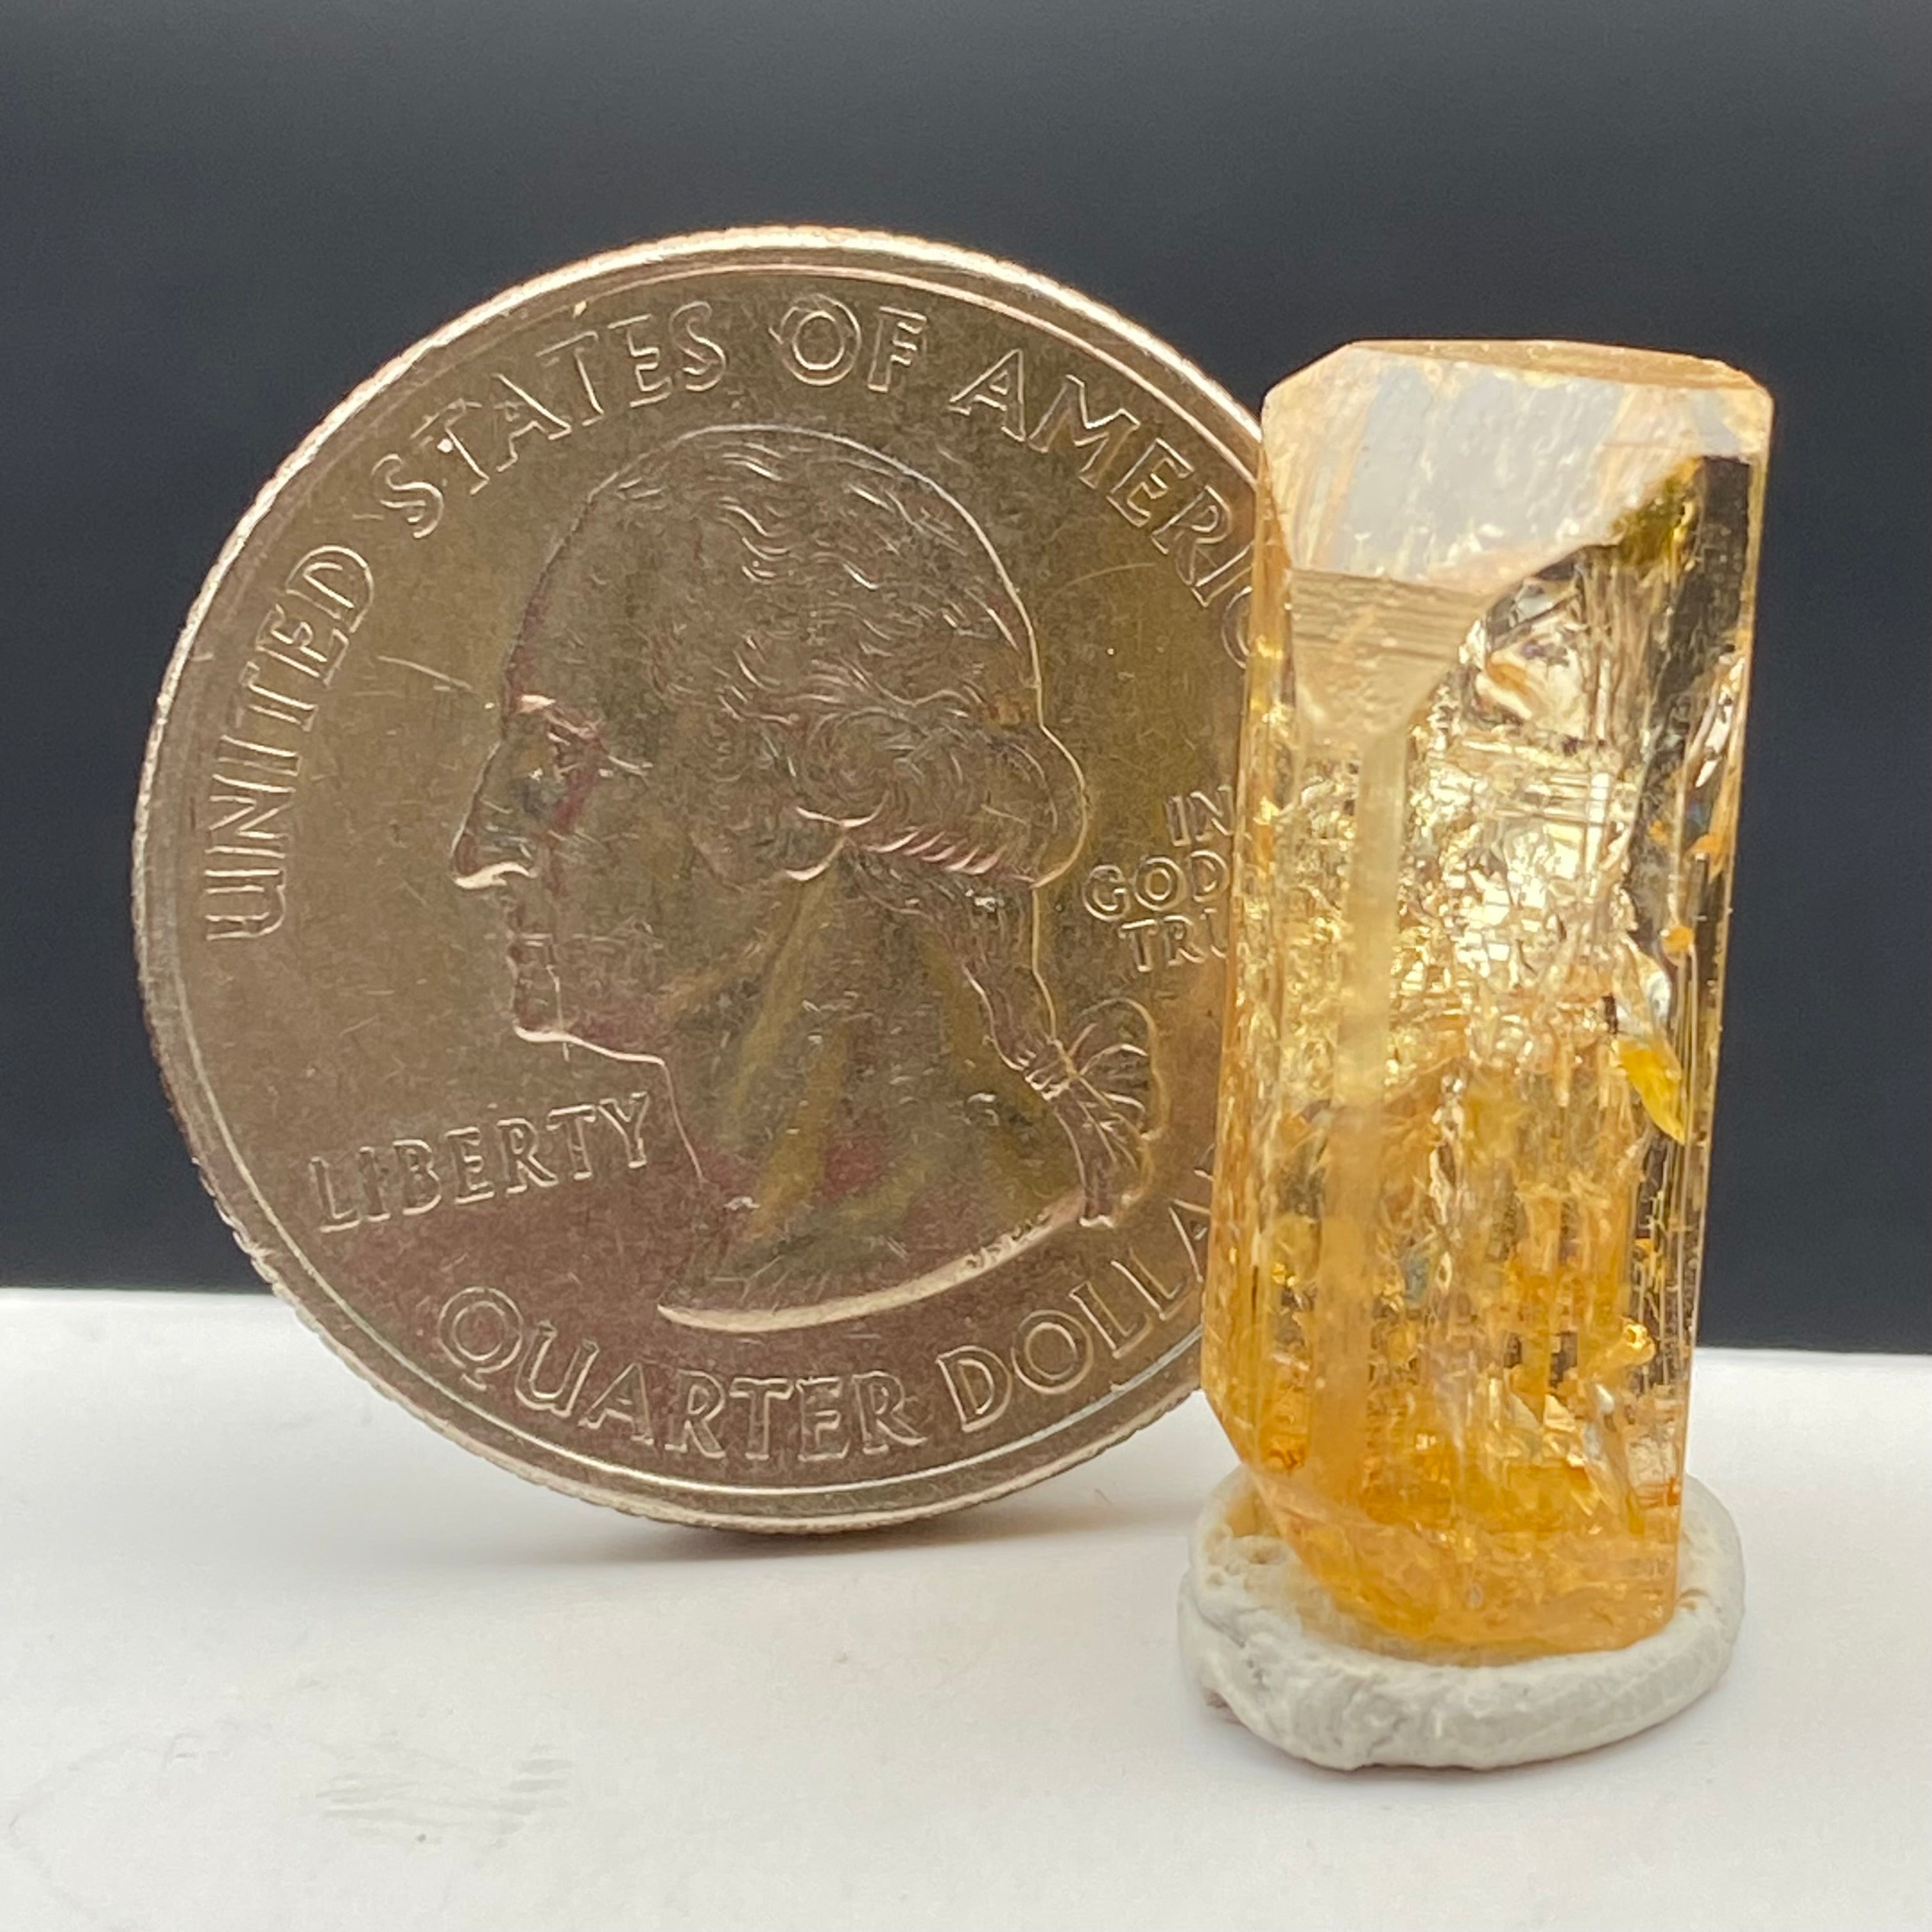 Imperial Topaz Natural Full Terminated Crystal - 093